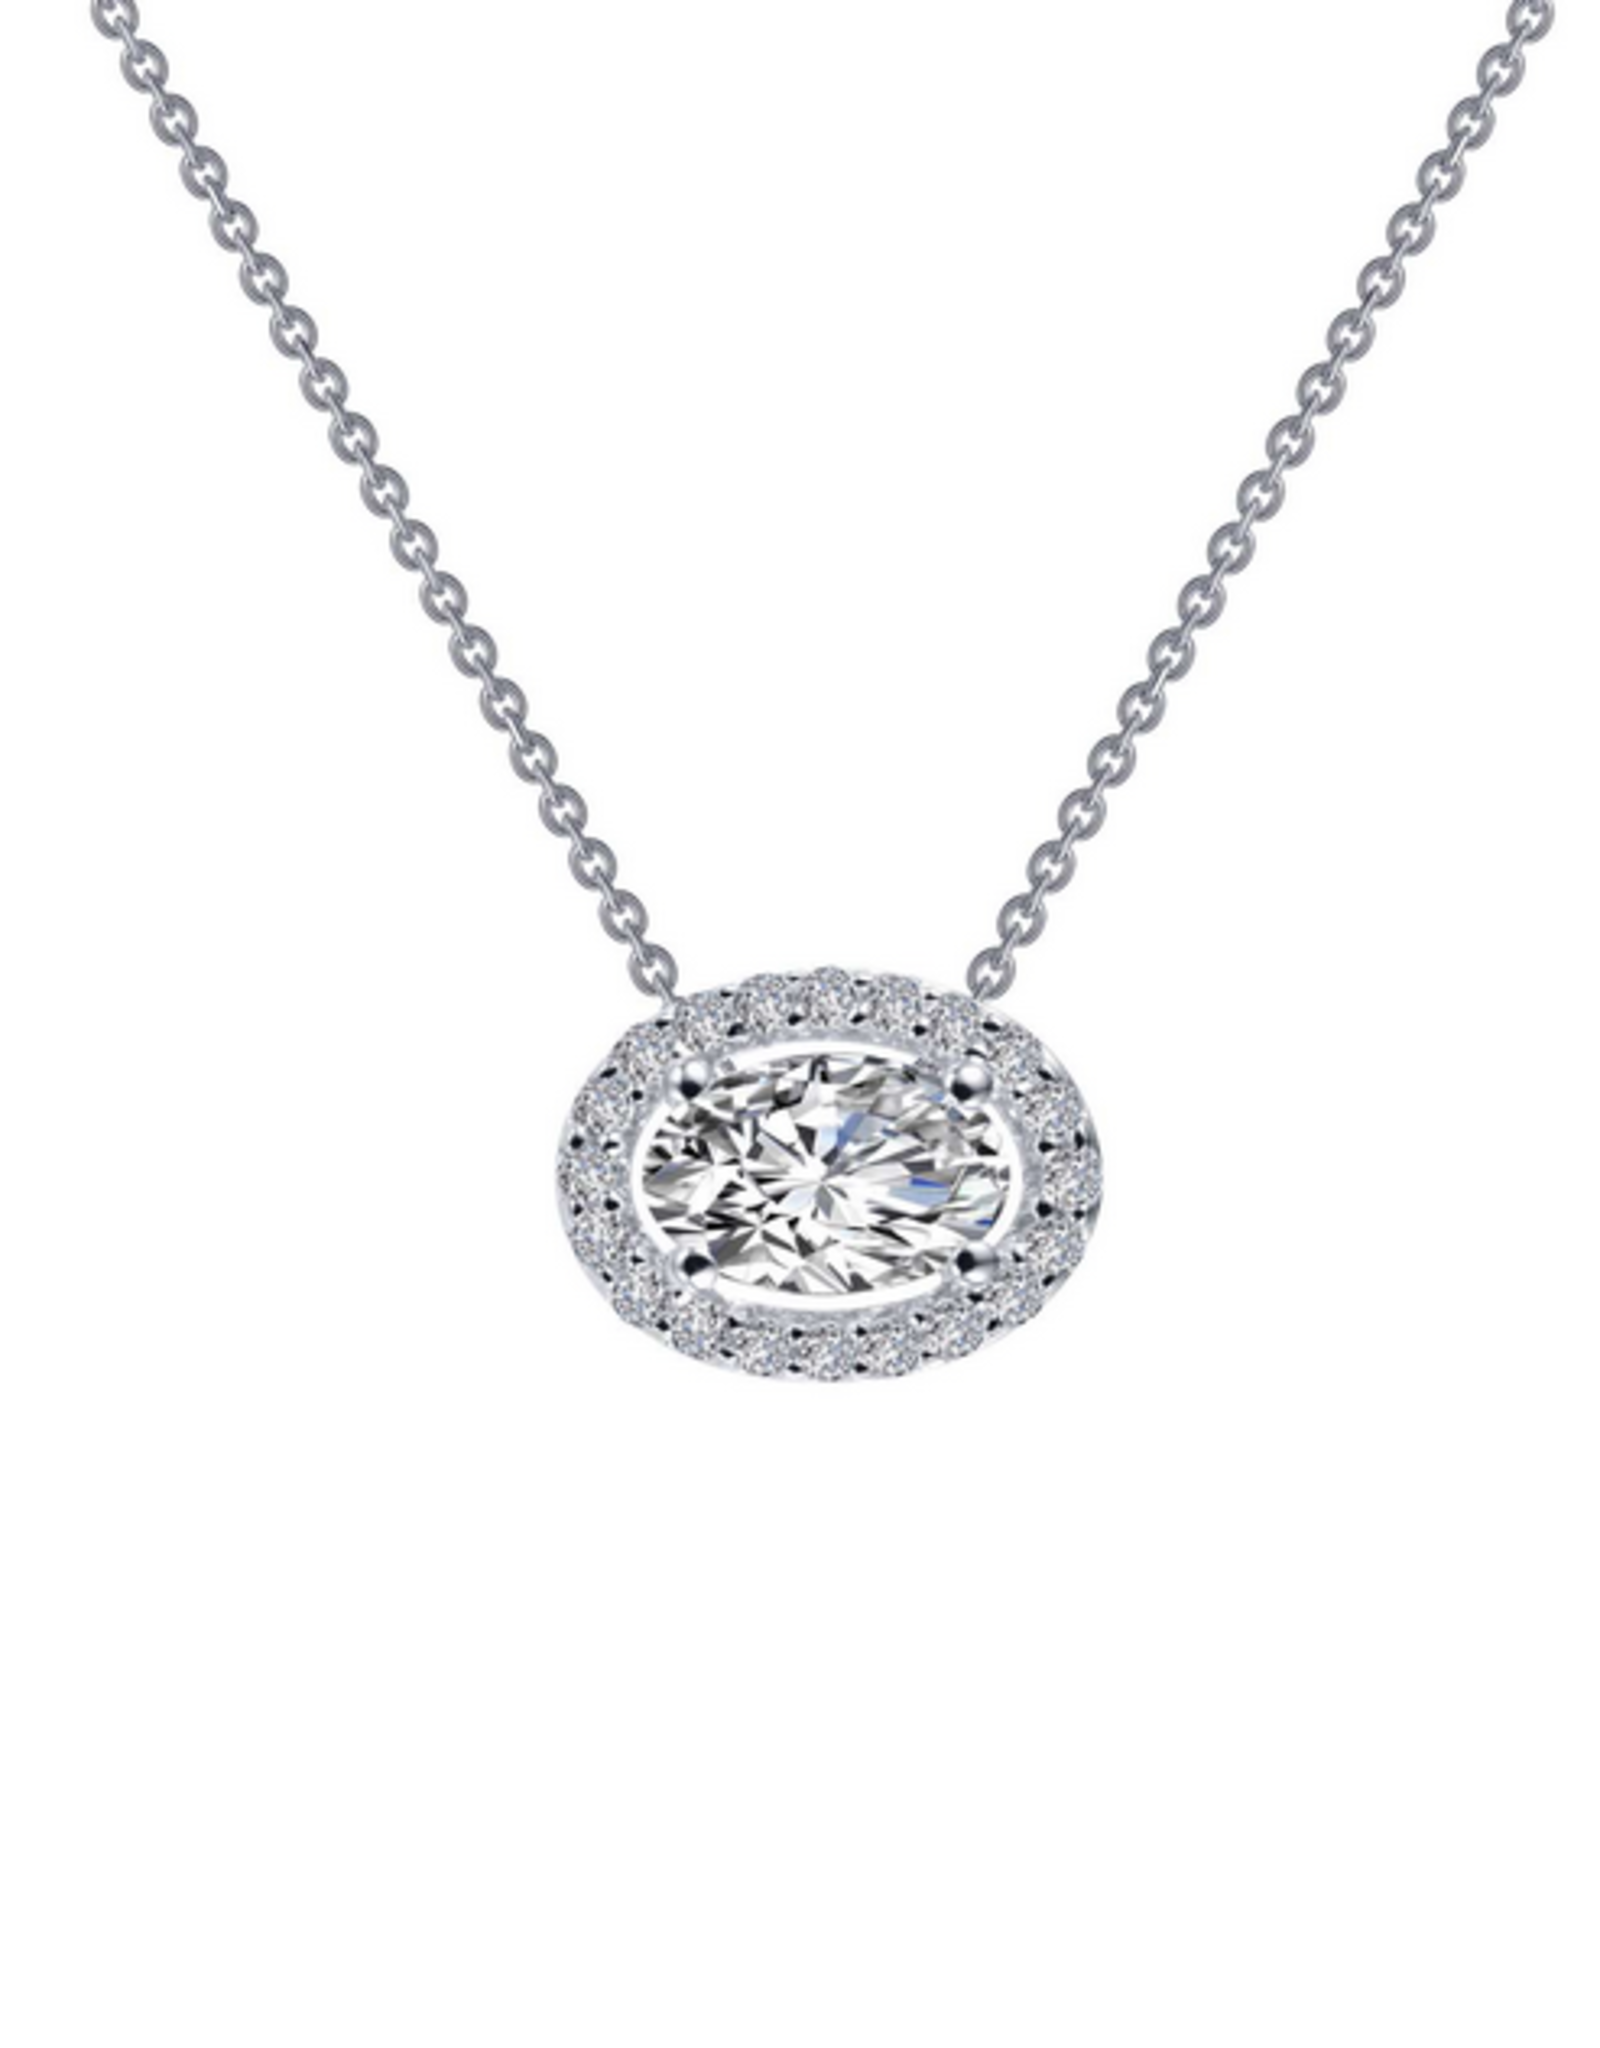 N0103CLP18 - Oval Halo .63 cttw Necklace